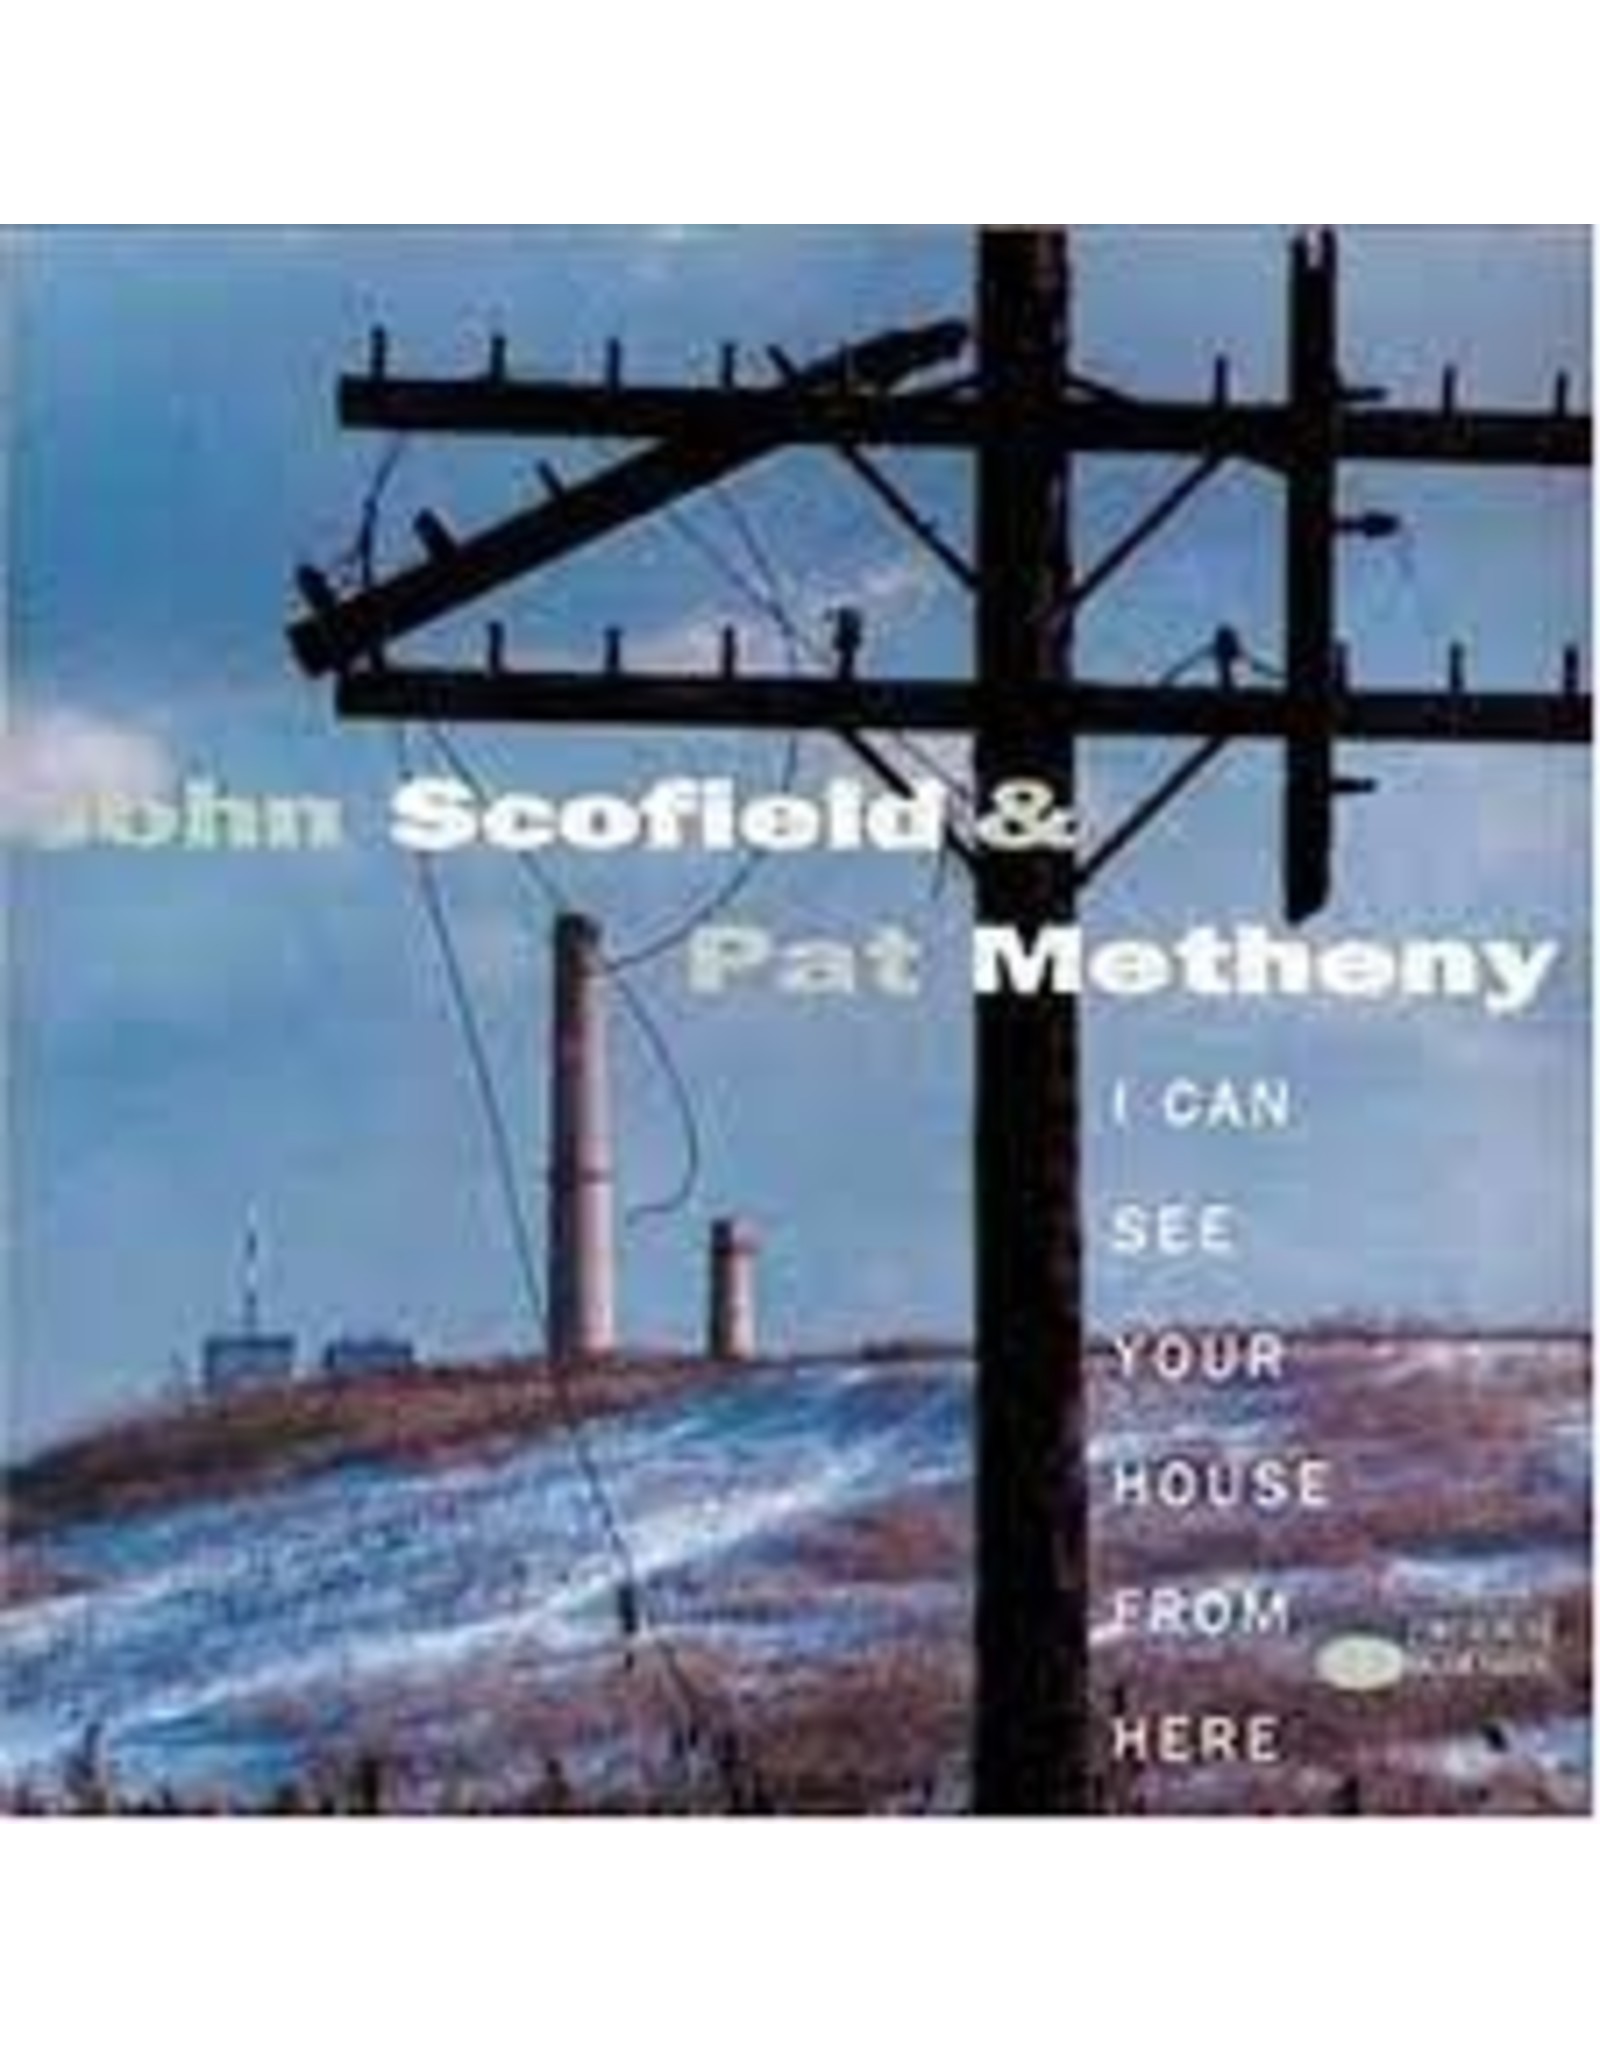 Scofield, John & Methany Pat - I Can See Your House From Here TONE POET LP